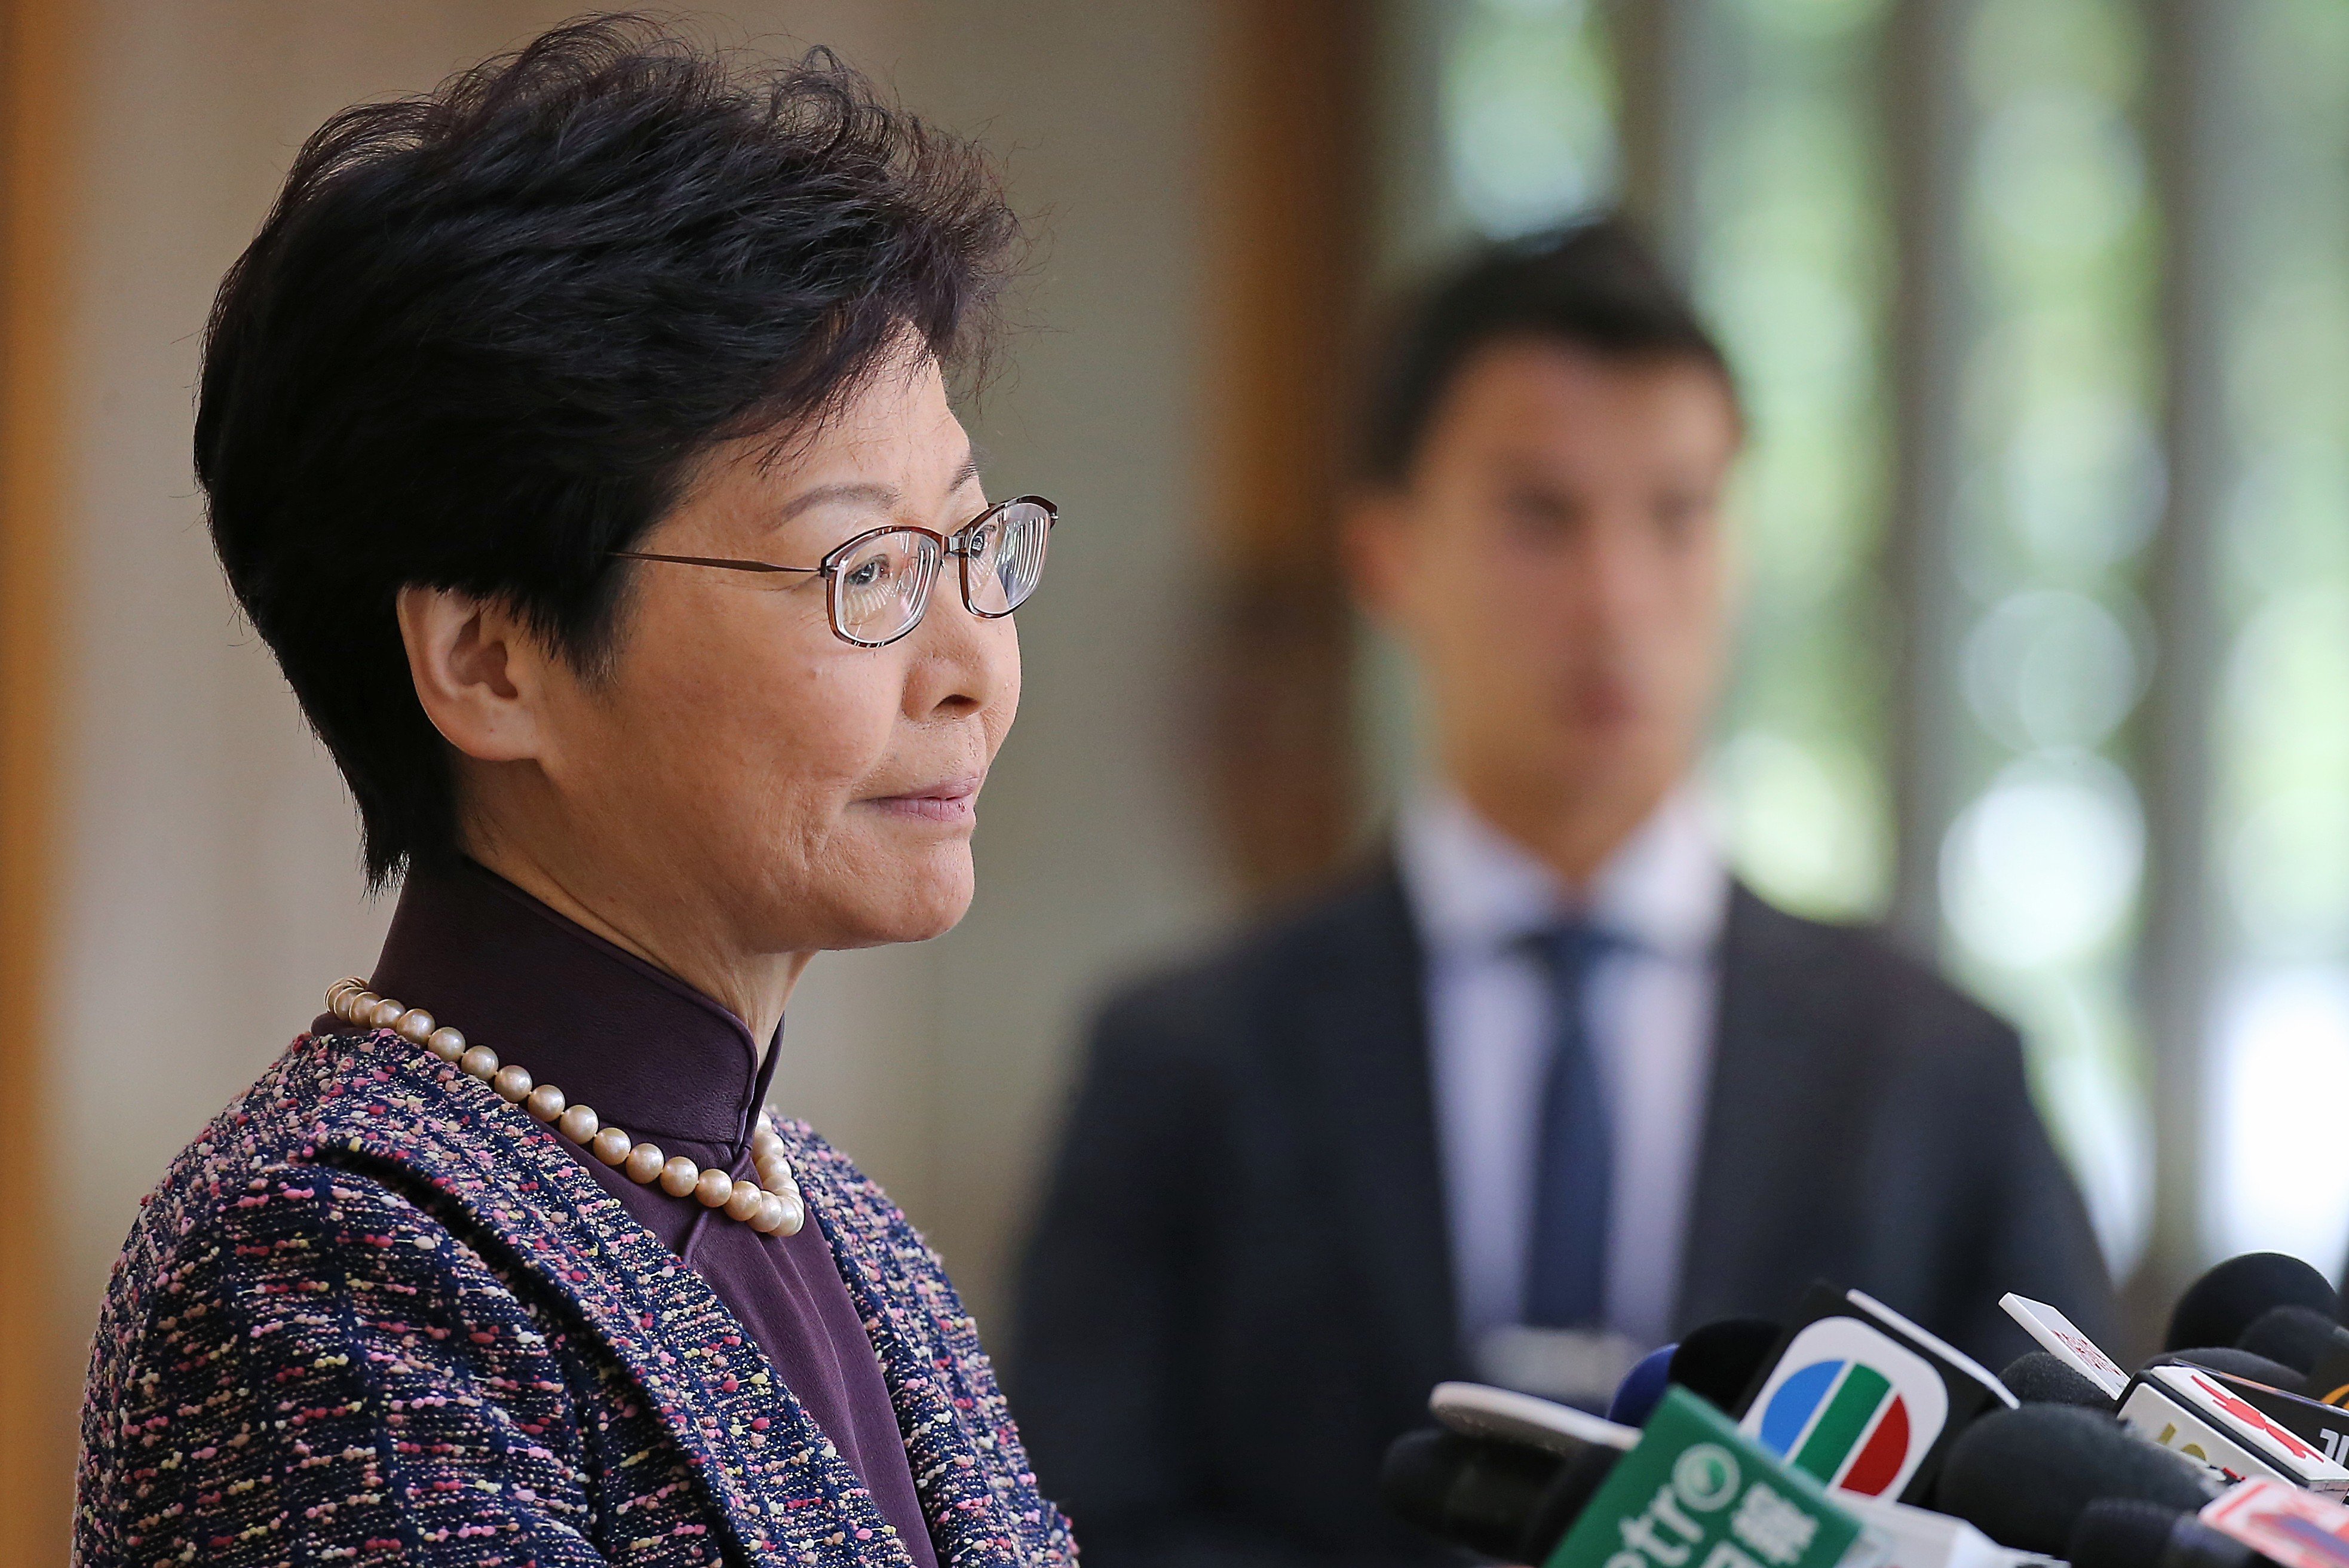 Chief Executive Carrie Lam Cheng Yuet-ngor highlighted innovation and research in her maiden policy address last year. Photo: Dickson Lee